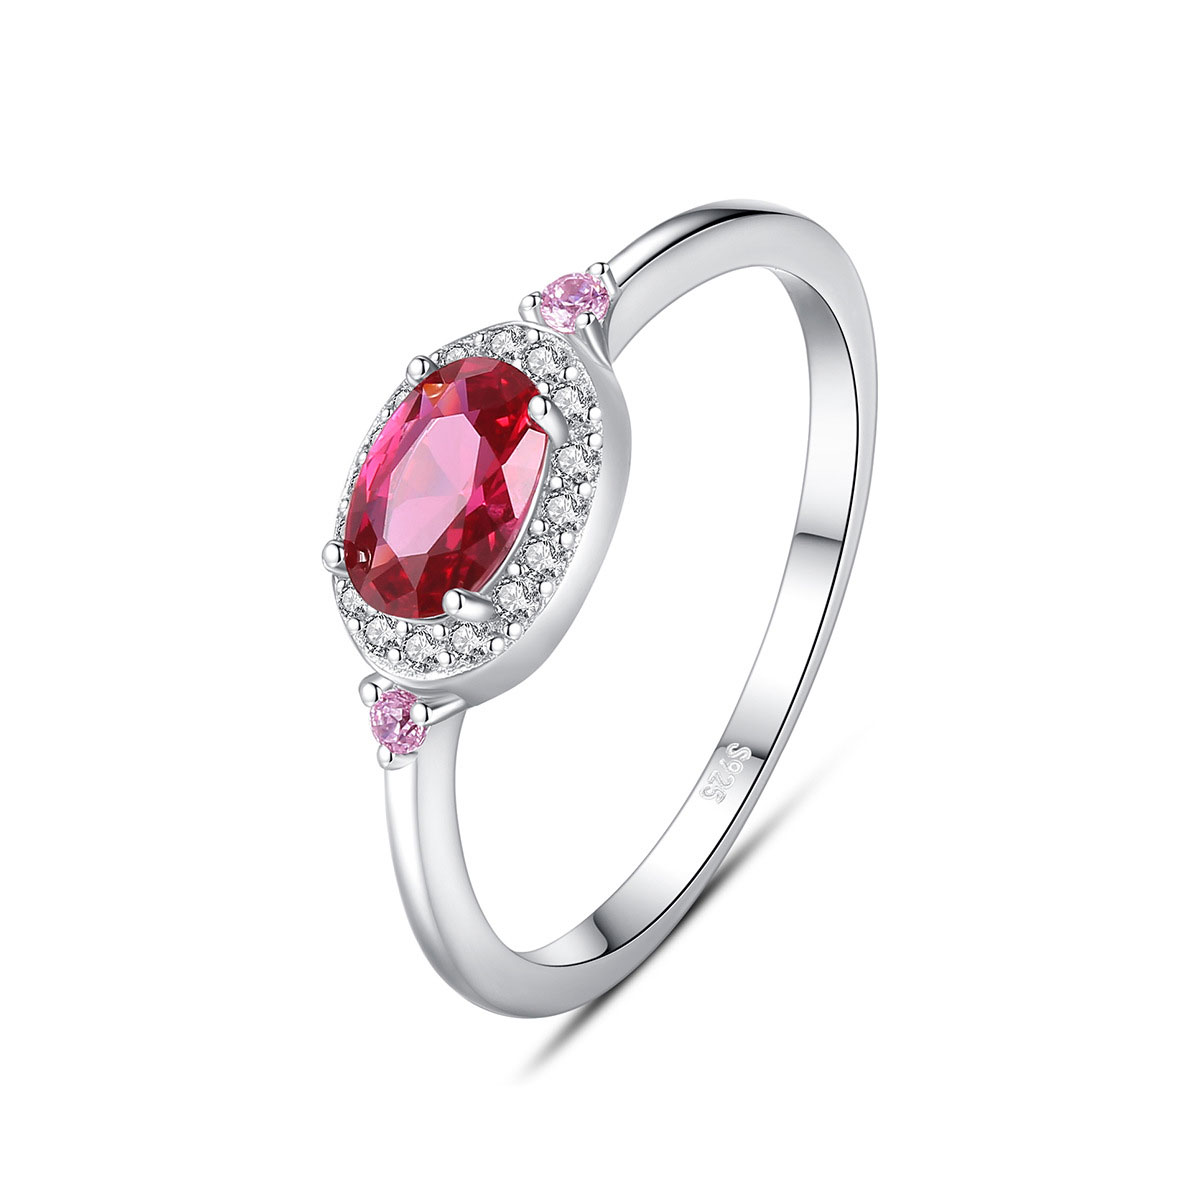 Fashion Personality Rainbow Full Diamond Stack VVS Red Ruby Sterling Silver Ring